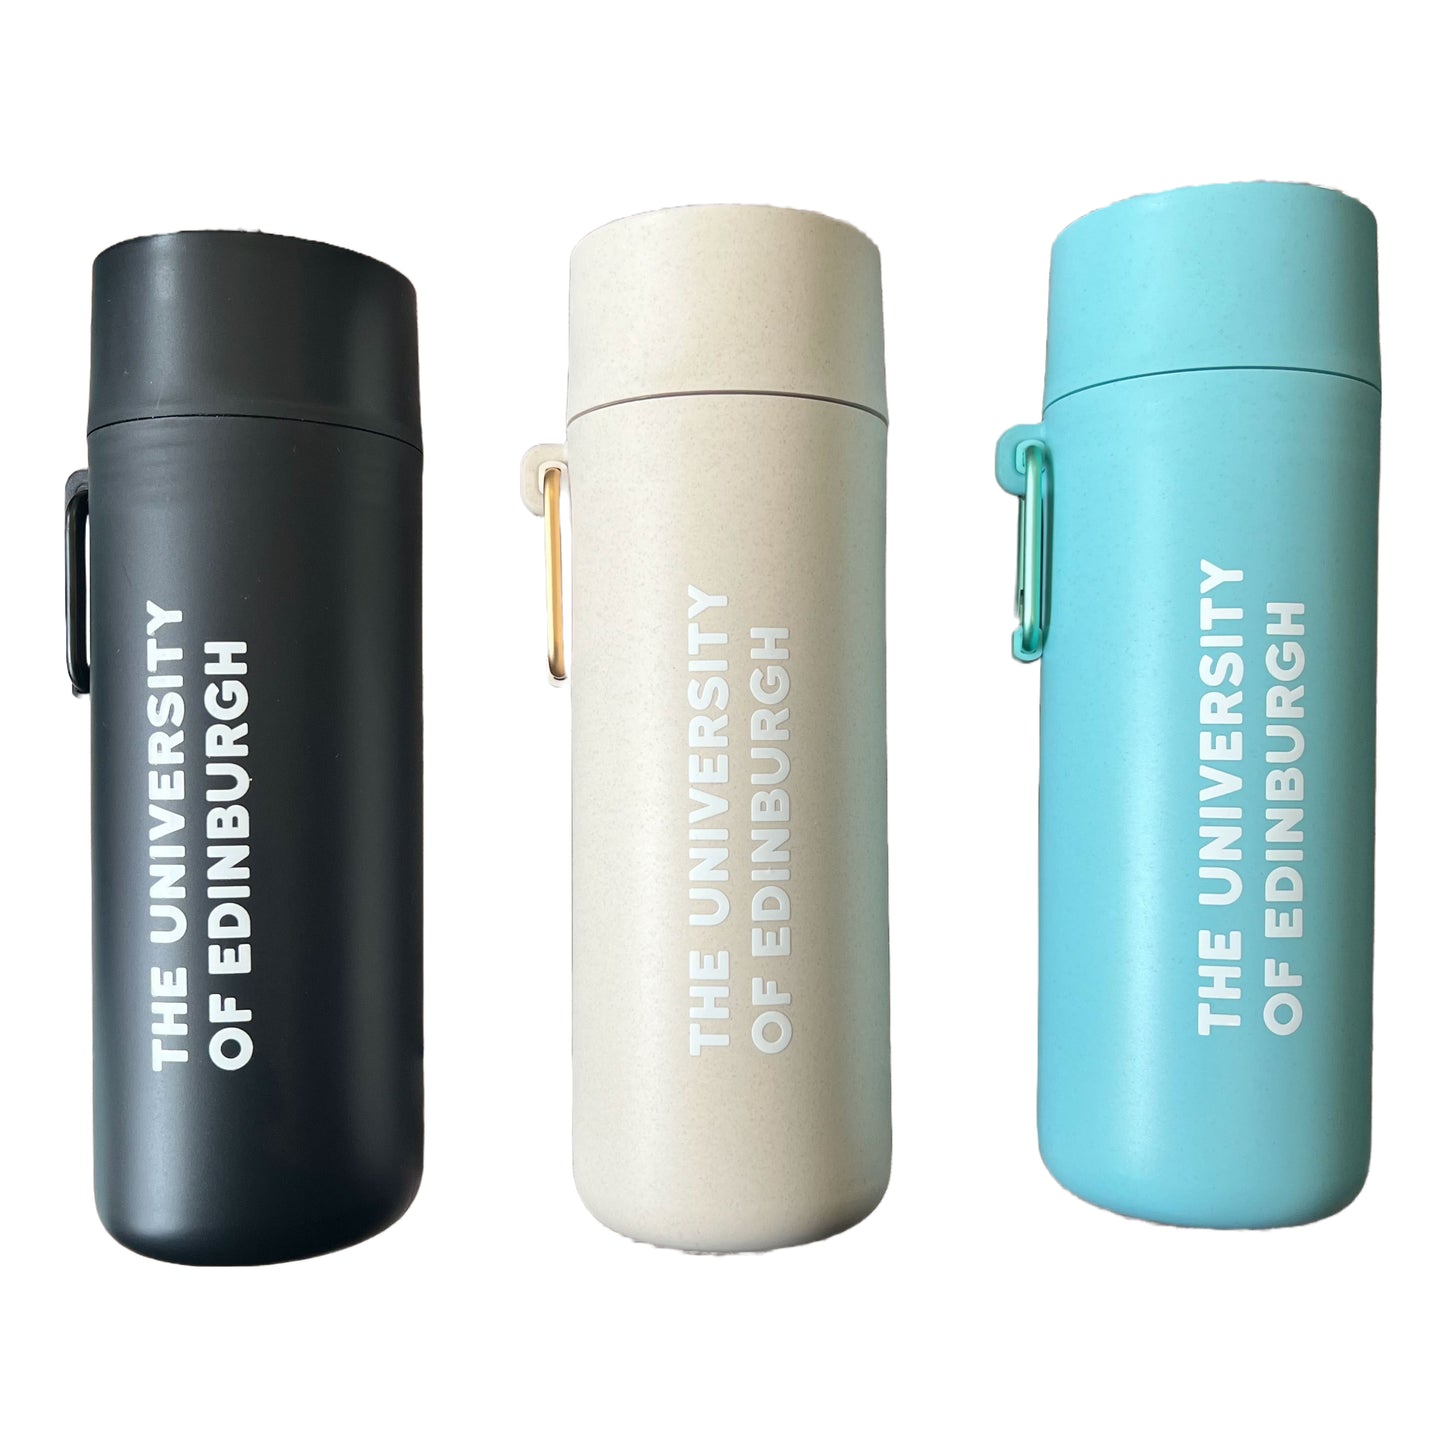 Swheat Brand Water Bottles with University of Edinburgh text in white. Available in three colours: Black, Oat and Light Blue.